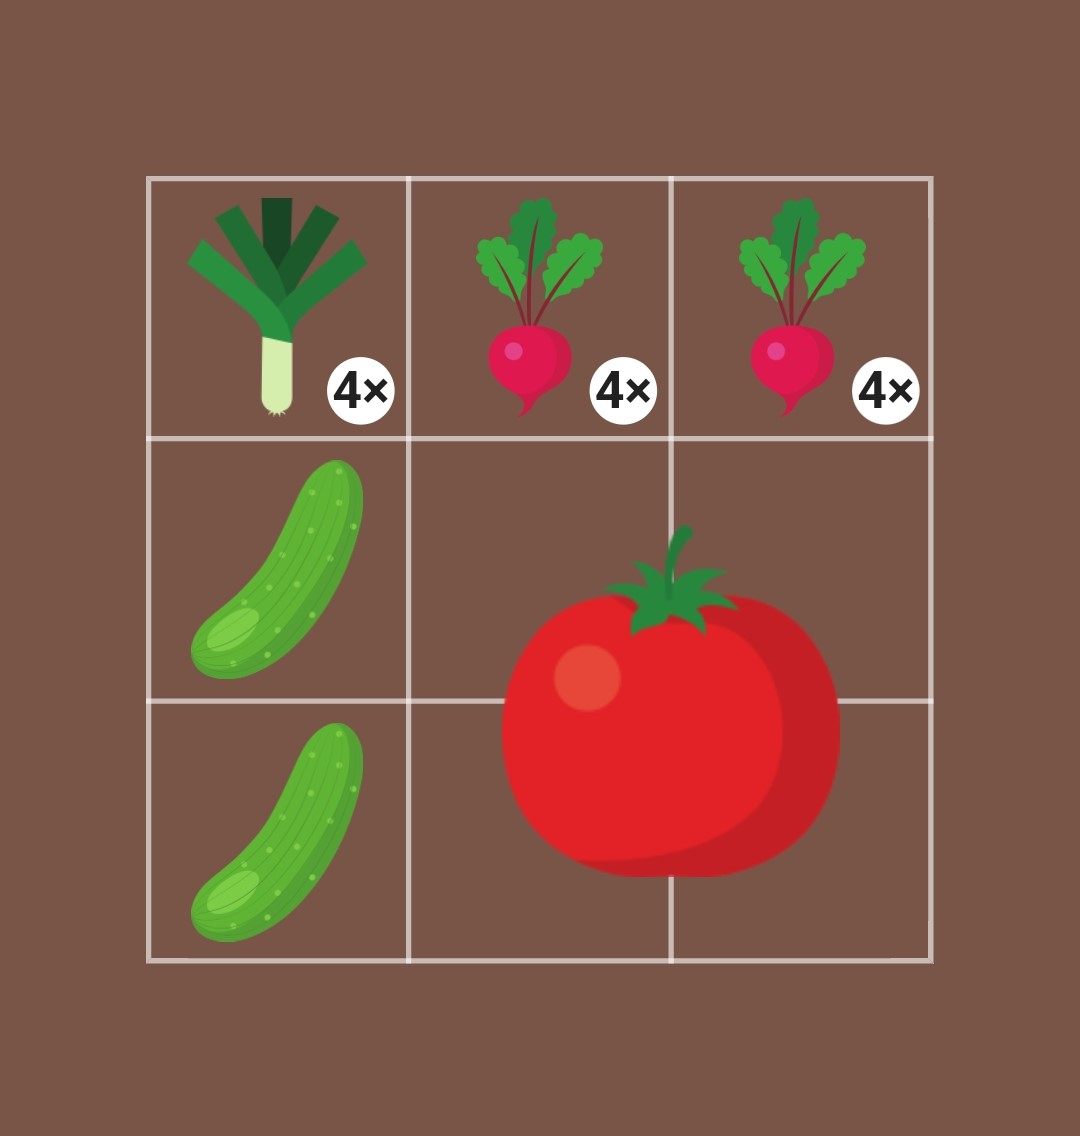 Screenshot of a garden with plant spacing indicators